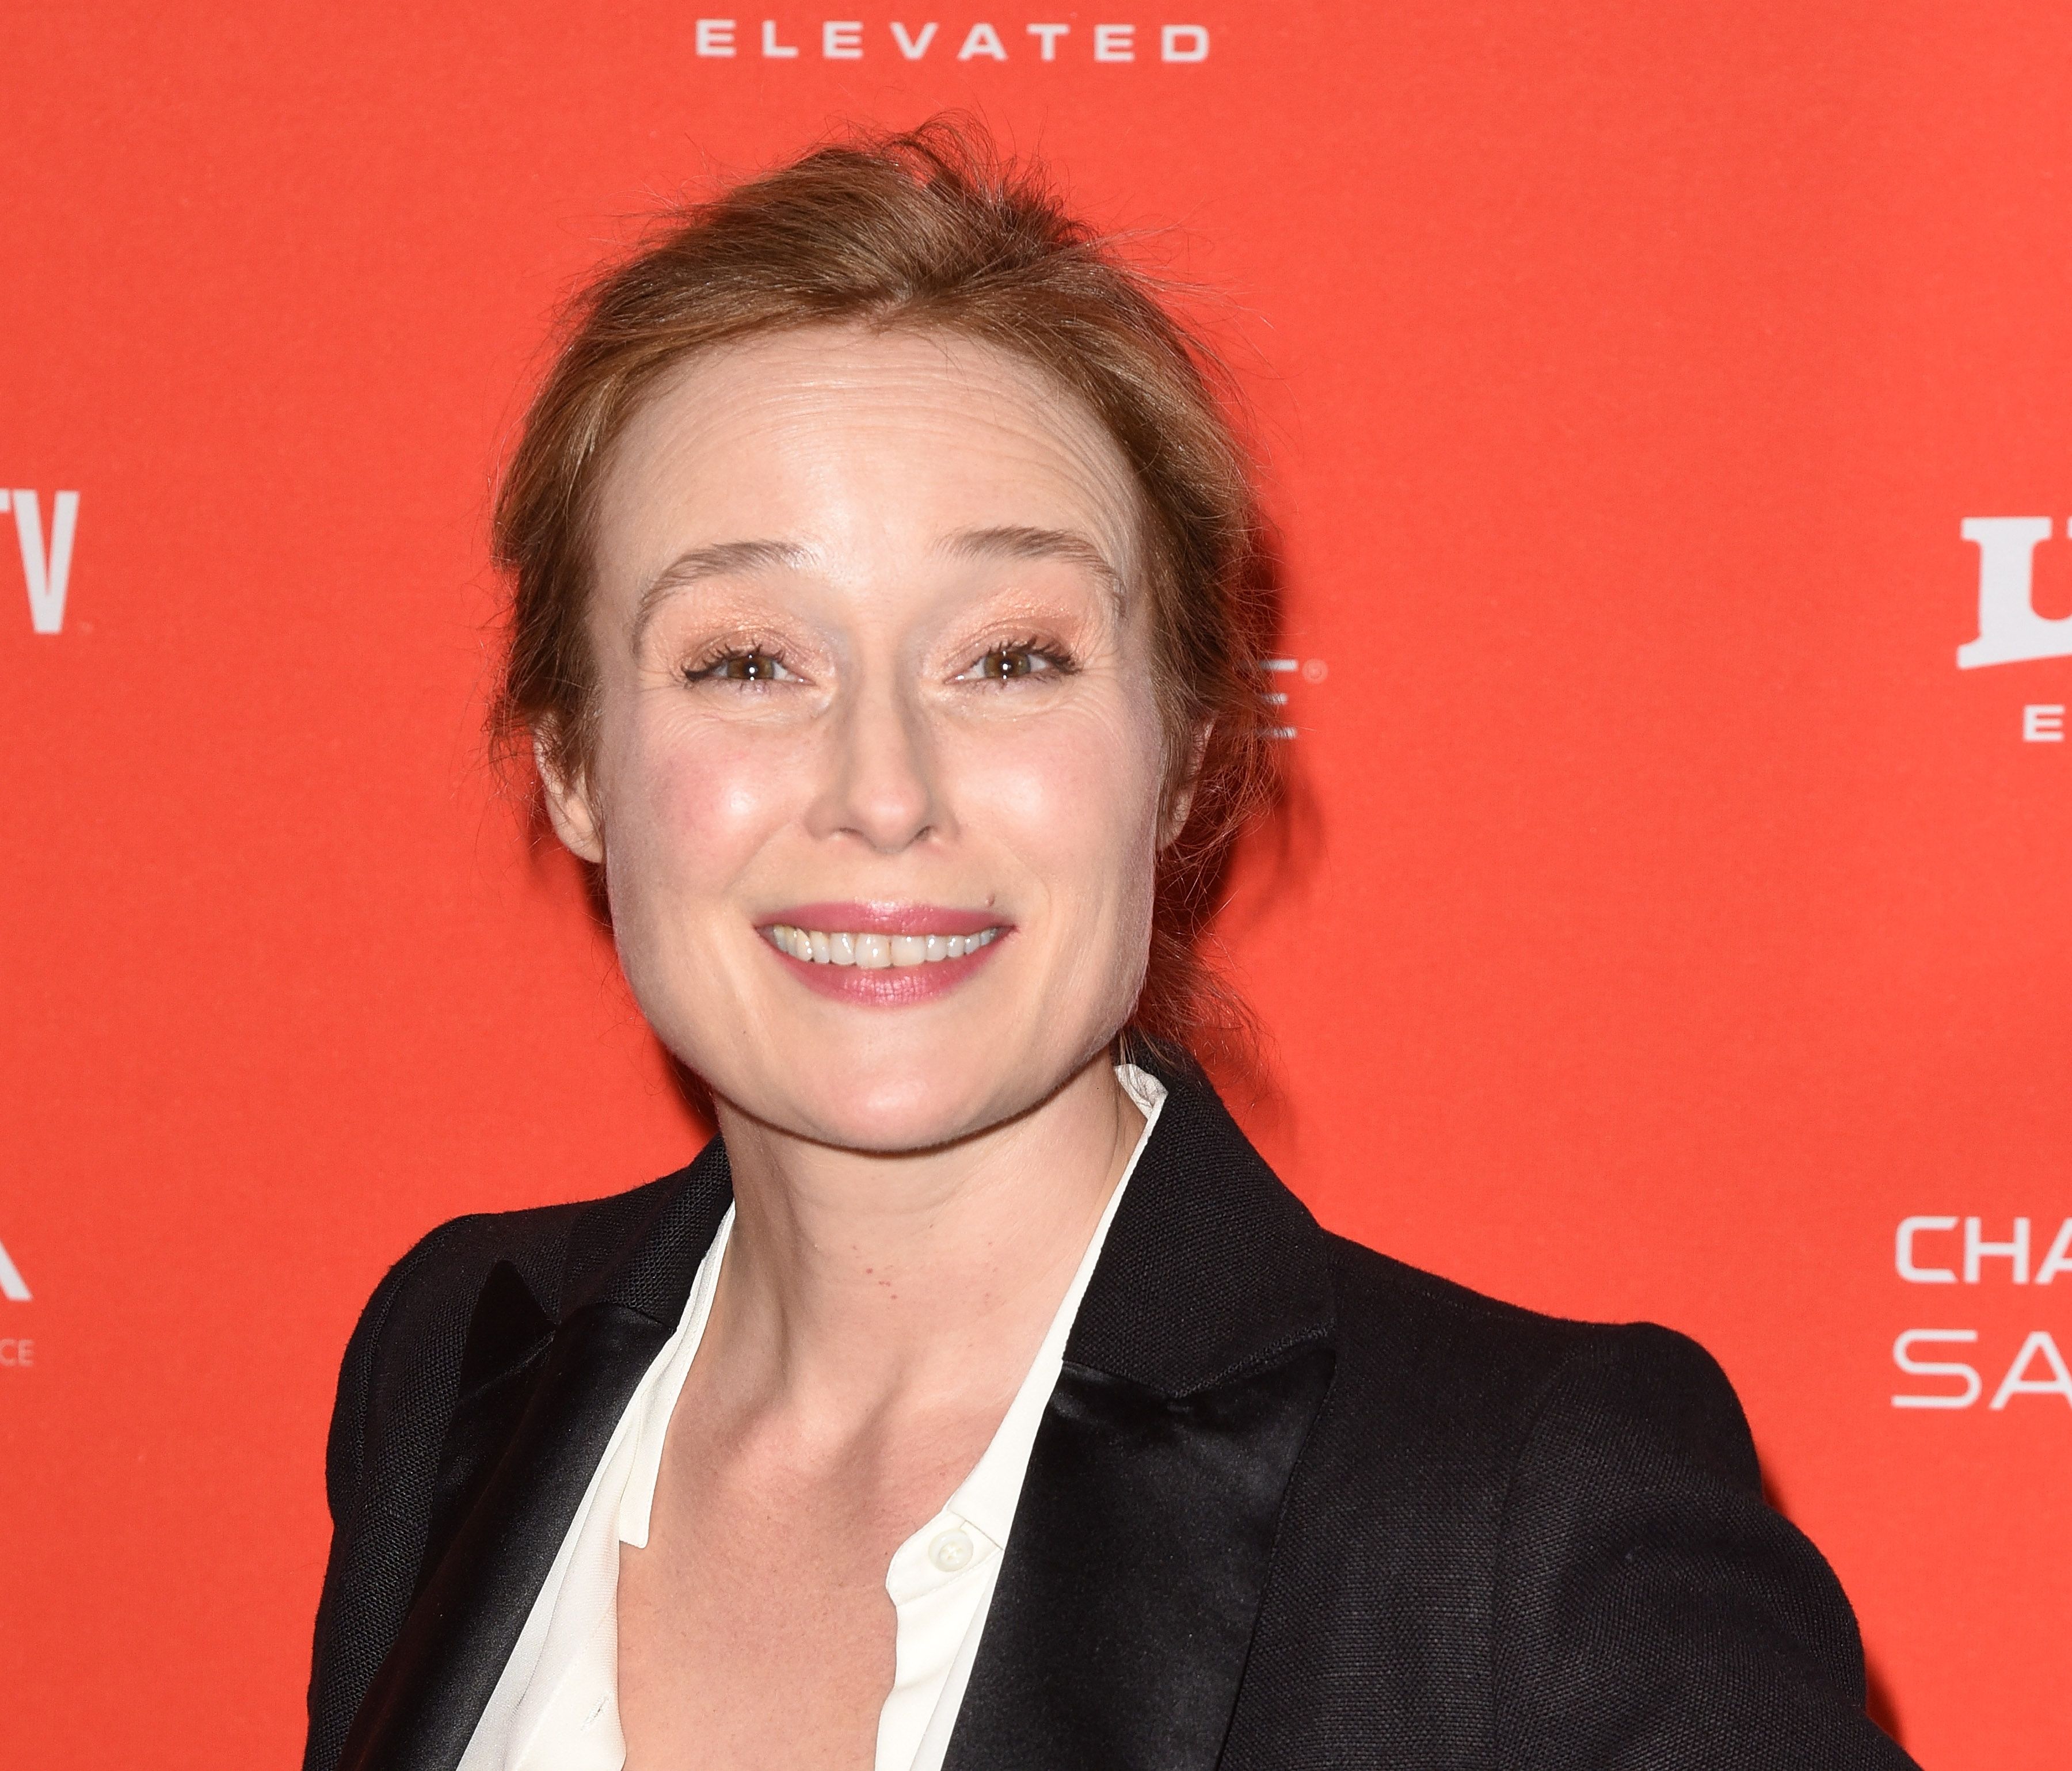 PARK CITY, UT - JANUARY 22: Actor Jennifer Ehle attends the 'The Miseducation Of Cameron Post' And 'I Like Girls' Premieres during the 2018 Sundance Film Festival at Eccles Center Theatre on January 22, 2018 in Park City, Utah. (Photo by C Flanigan/FilmMagic)